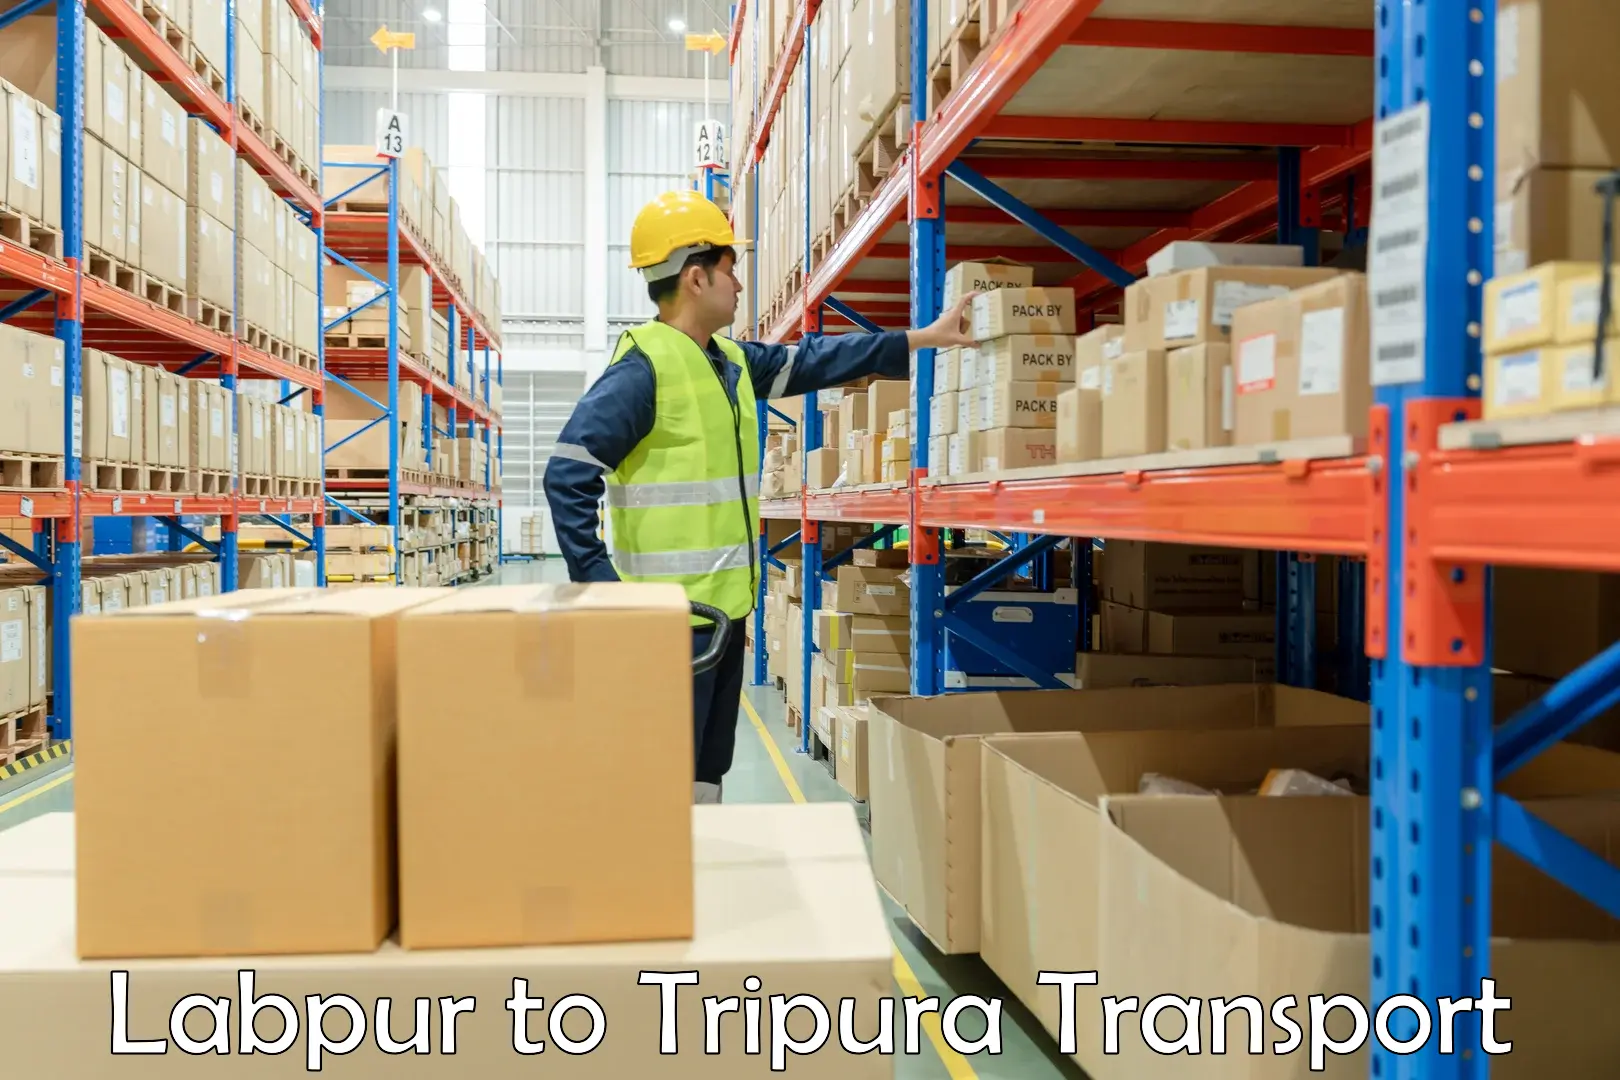 Transport shared services in Labpur to Udaipur Tripura